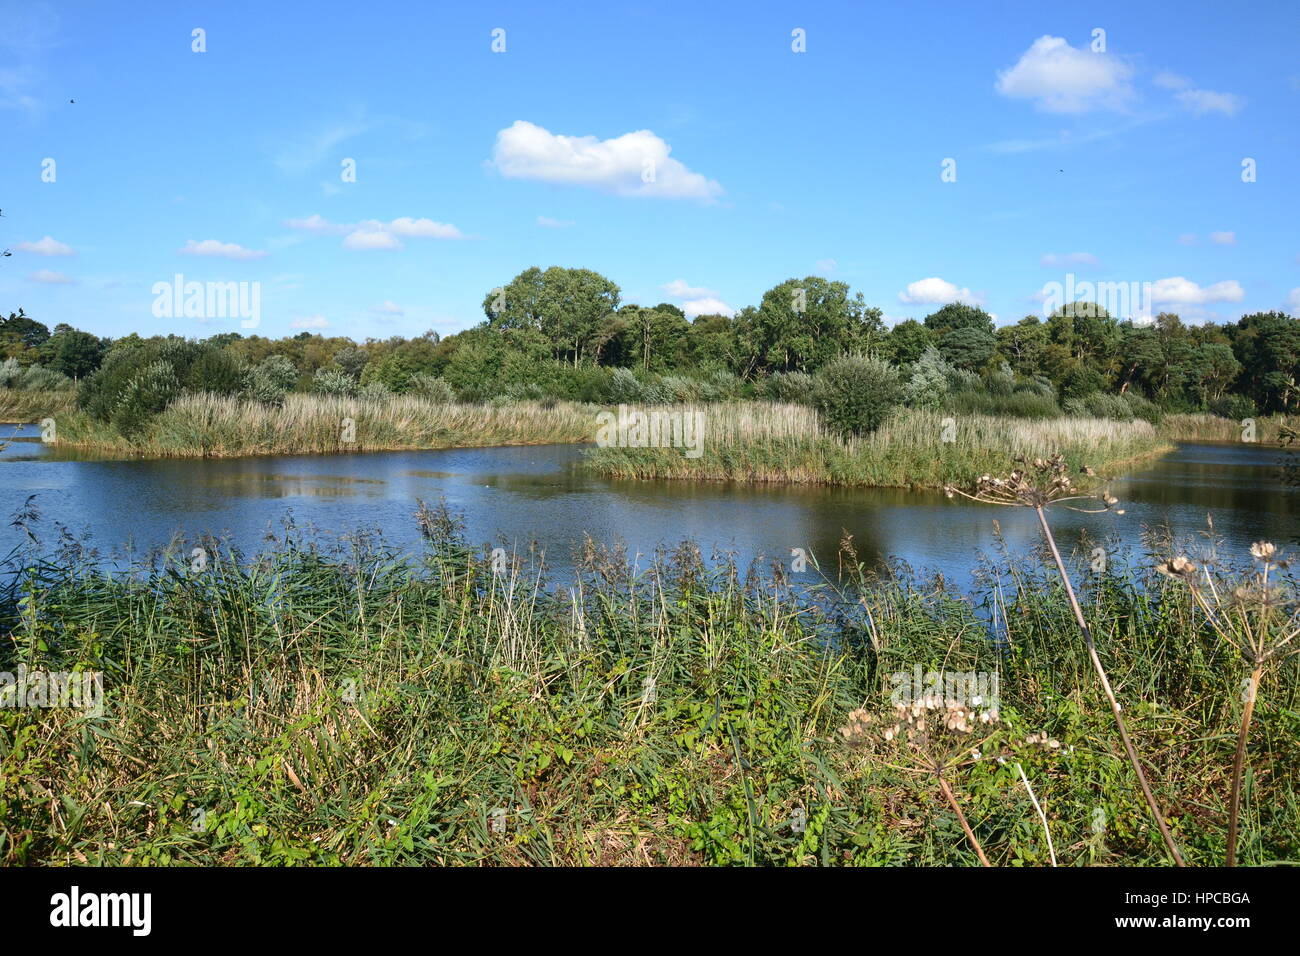 Westhay Moor National Nature Reserve Stockfoto